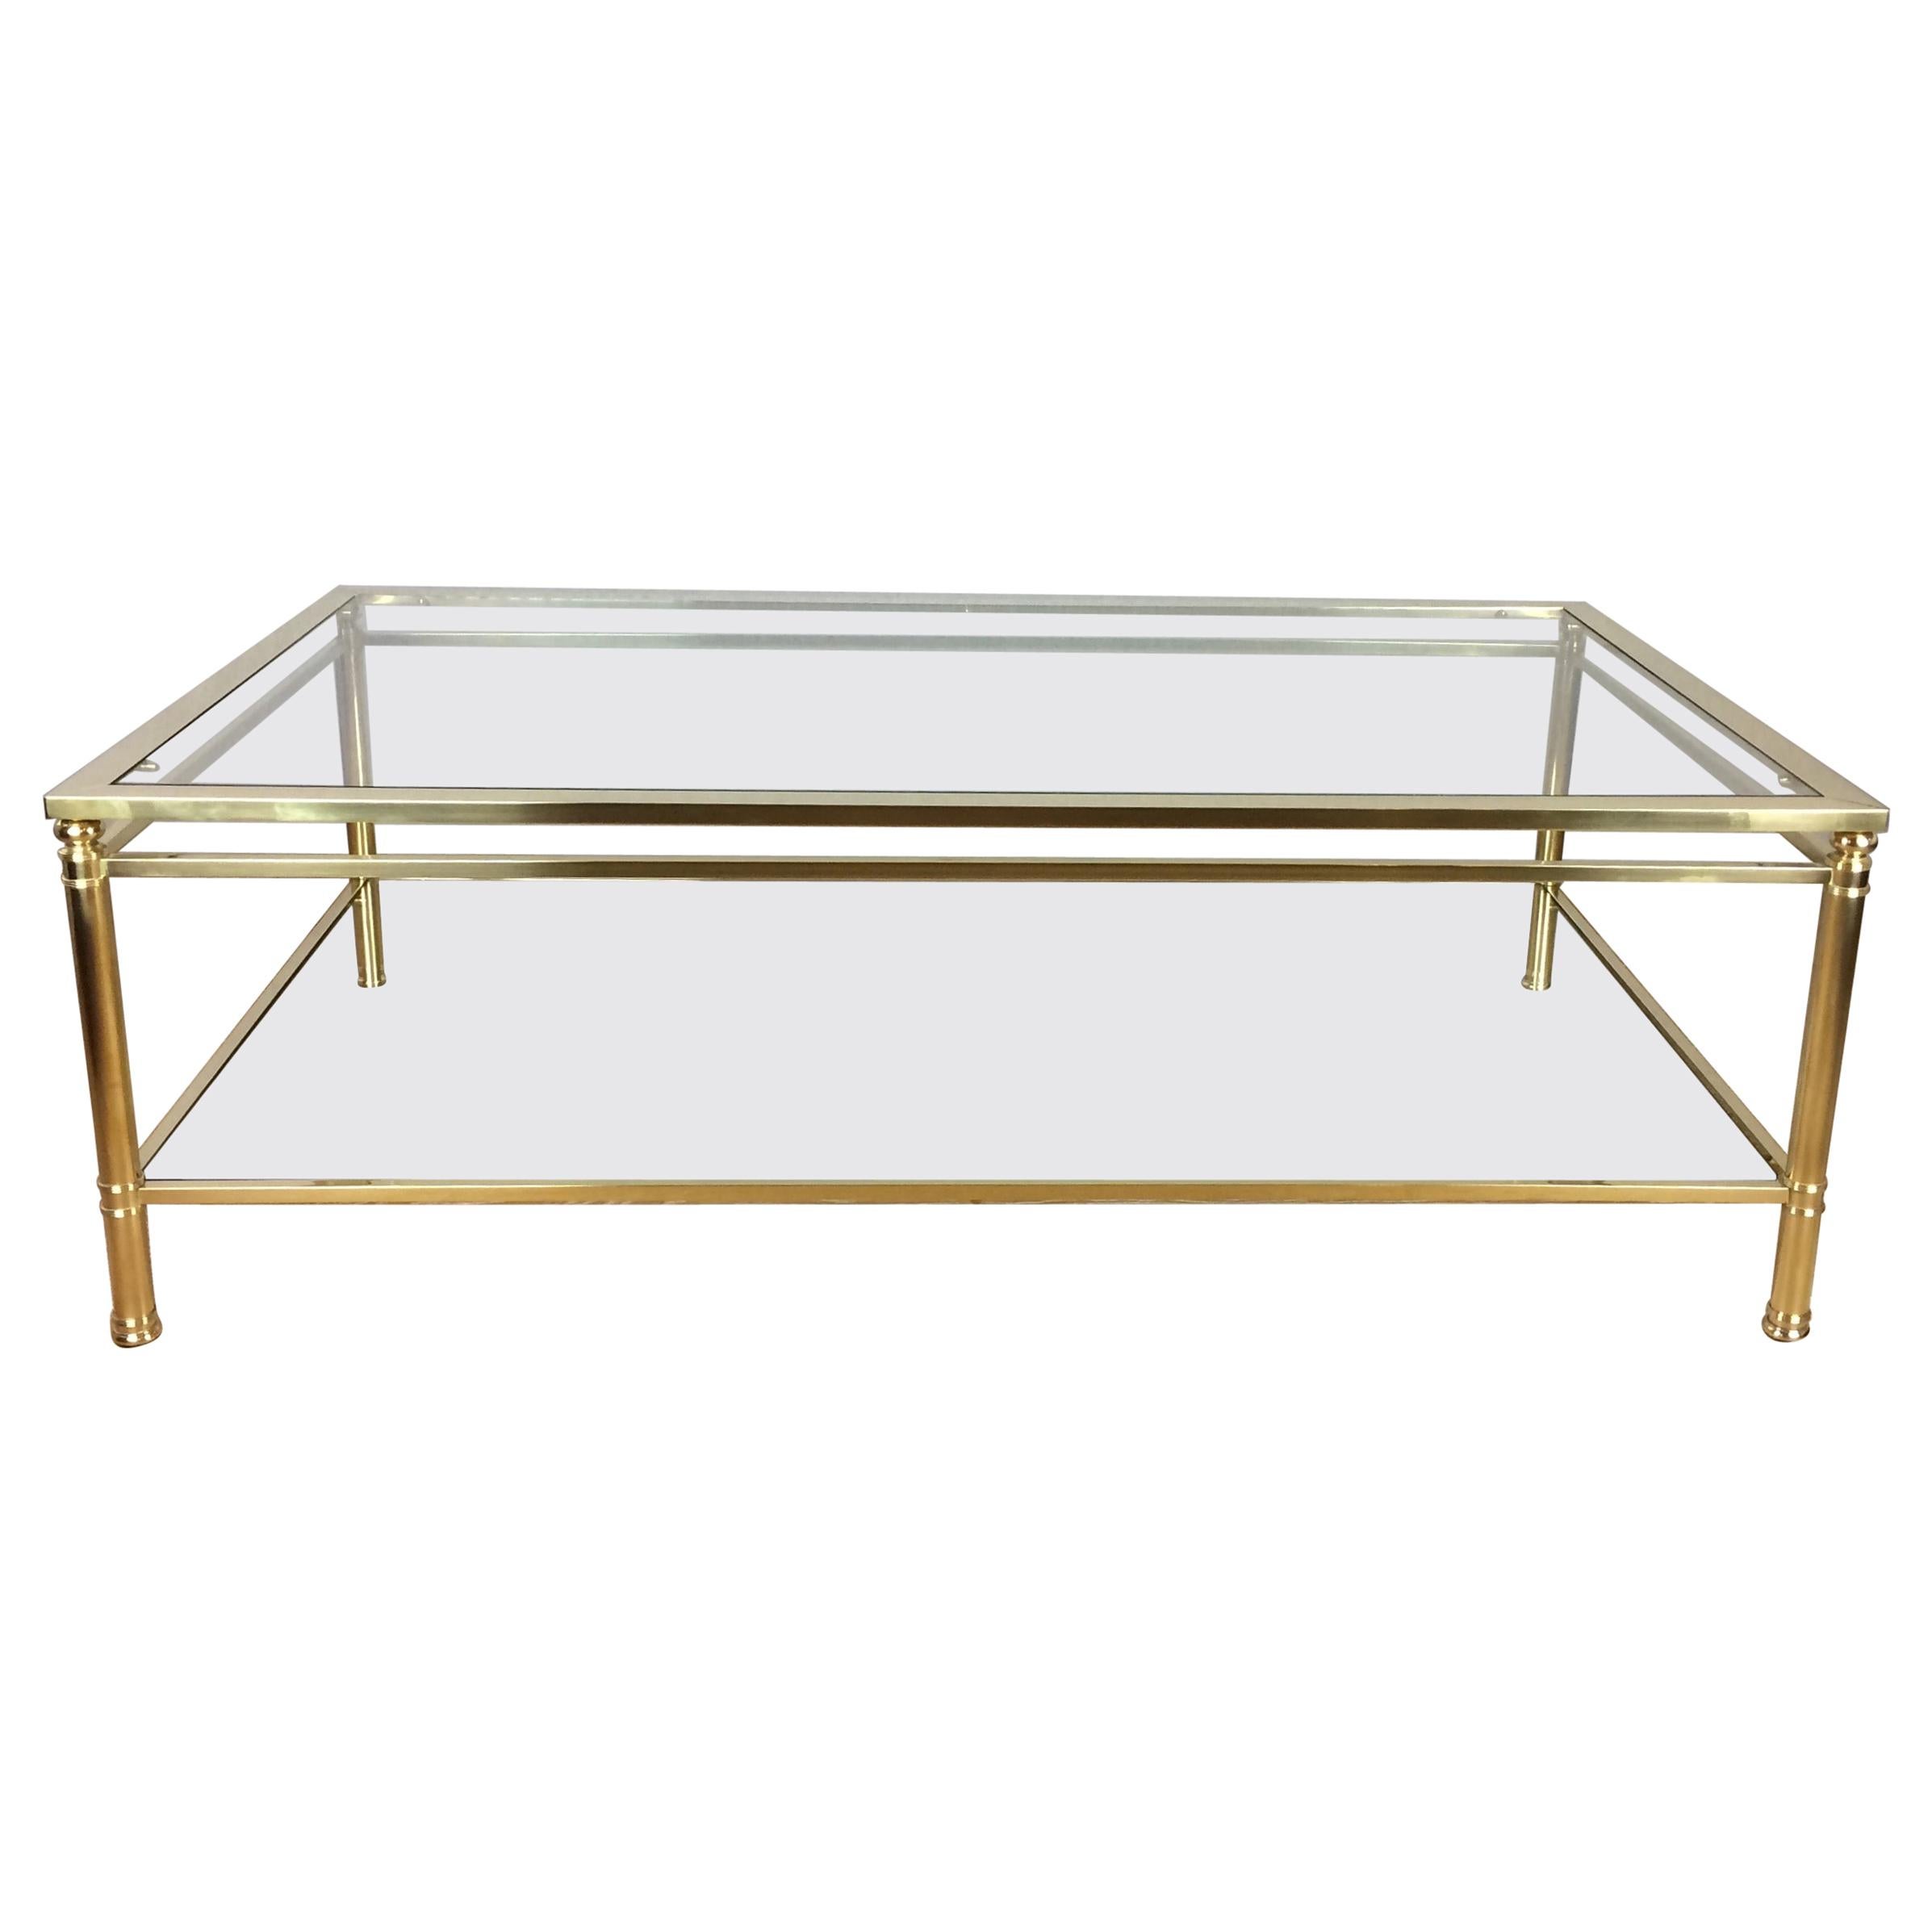 Midcentury Brass and Glass Tow-Tiered Coffee Table Attributed to Maison Jansen